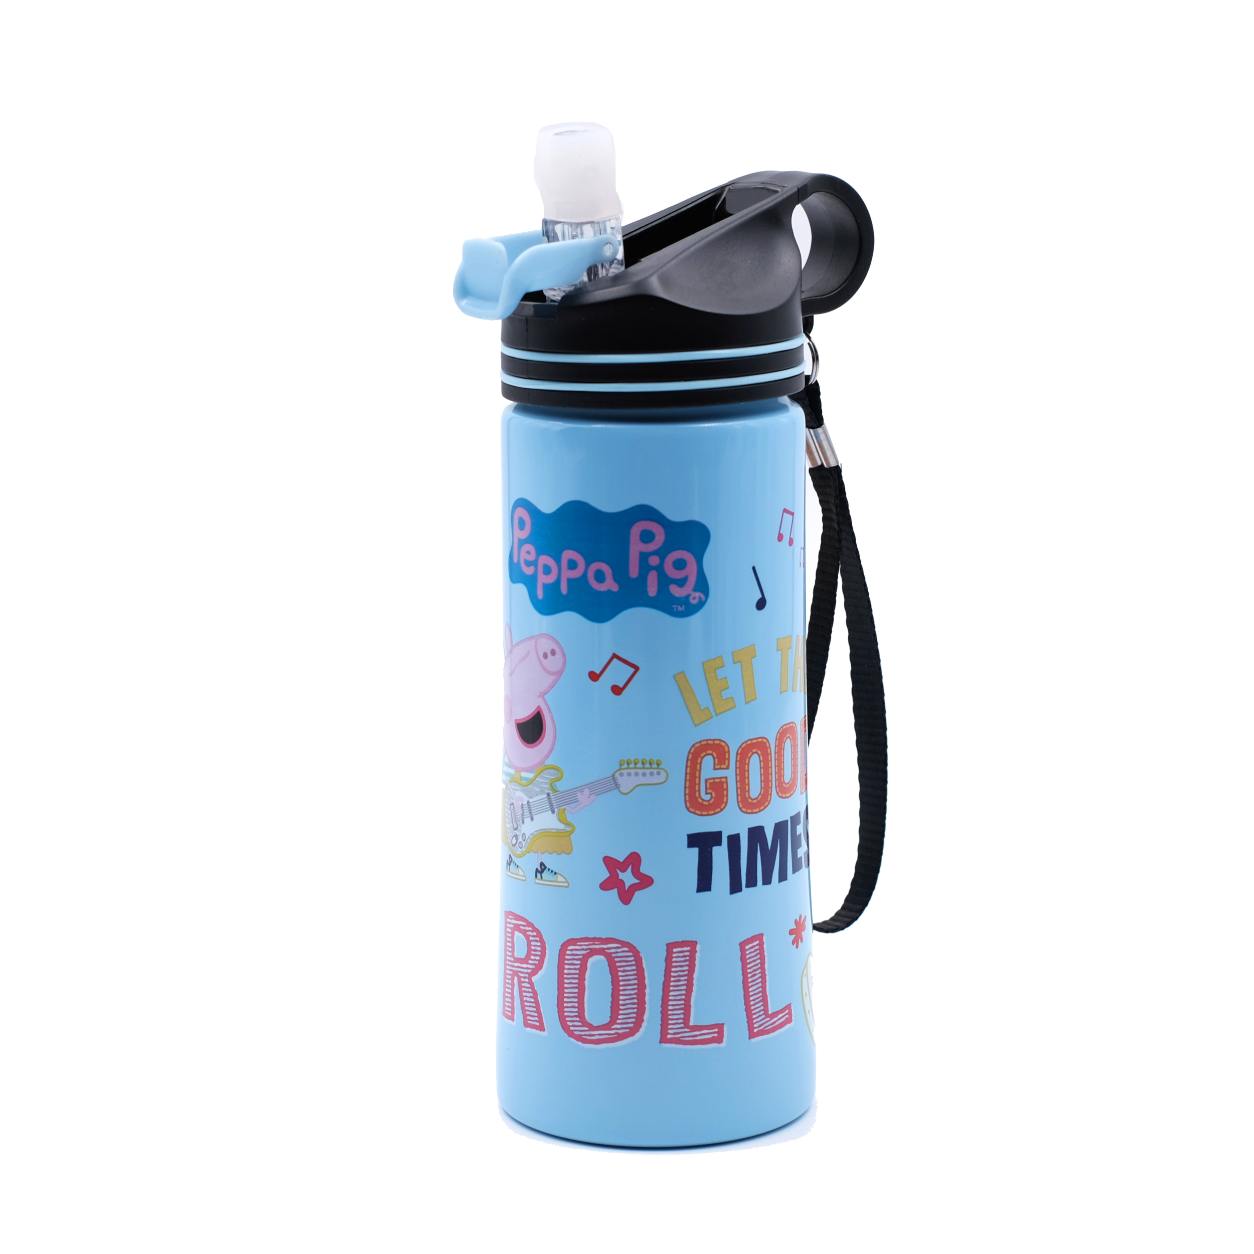 Youp Stainless Steel Blue Color Peppa Pig Kids Water Bottle HYOWER - 750 ml